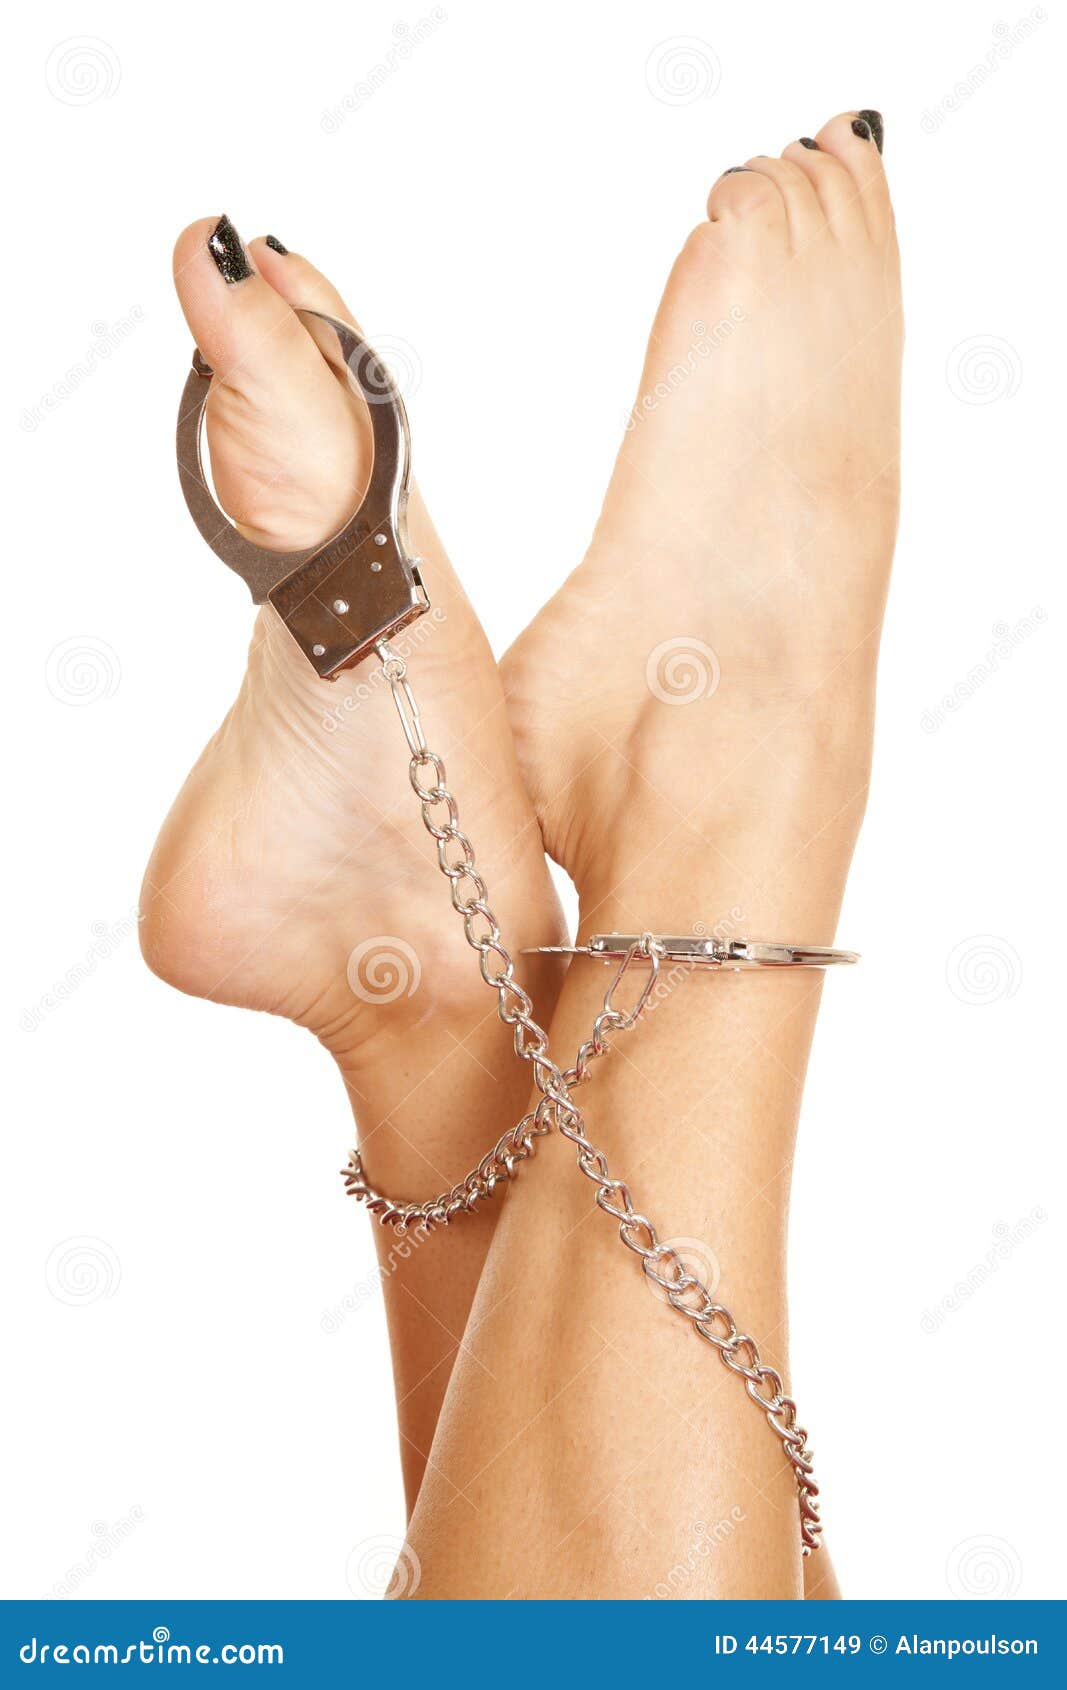 Sexy Long Female Legs In High Heel Shoes And Leg Cuffs Against